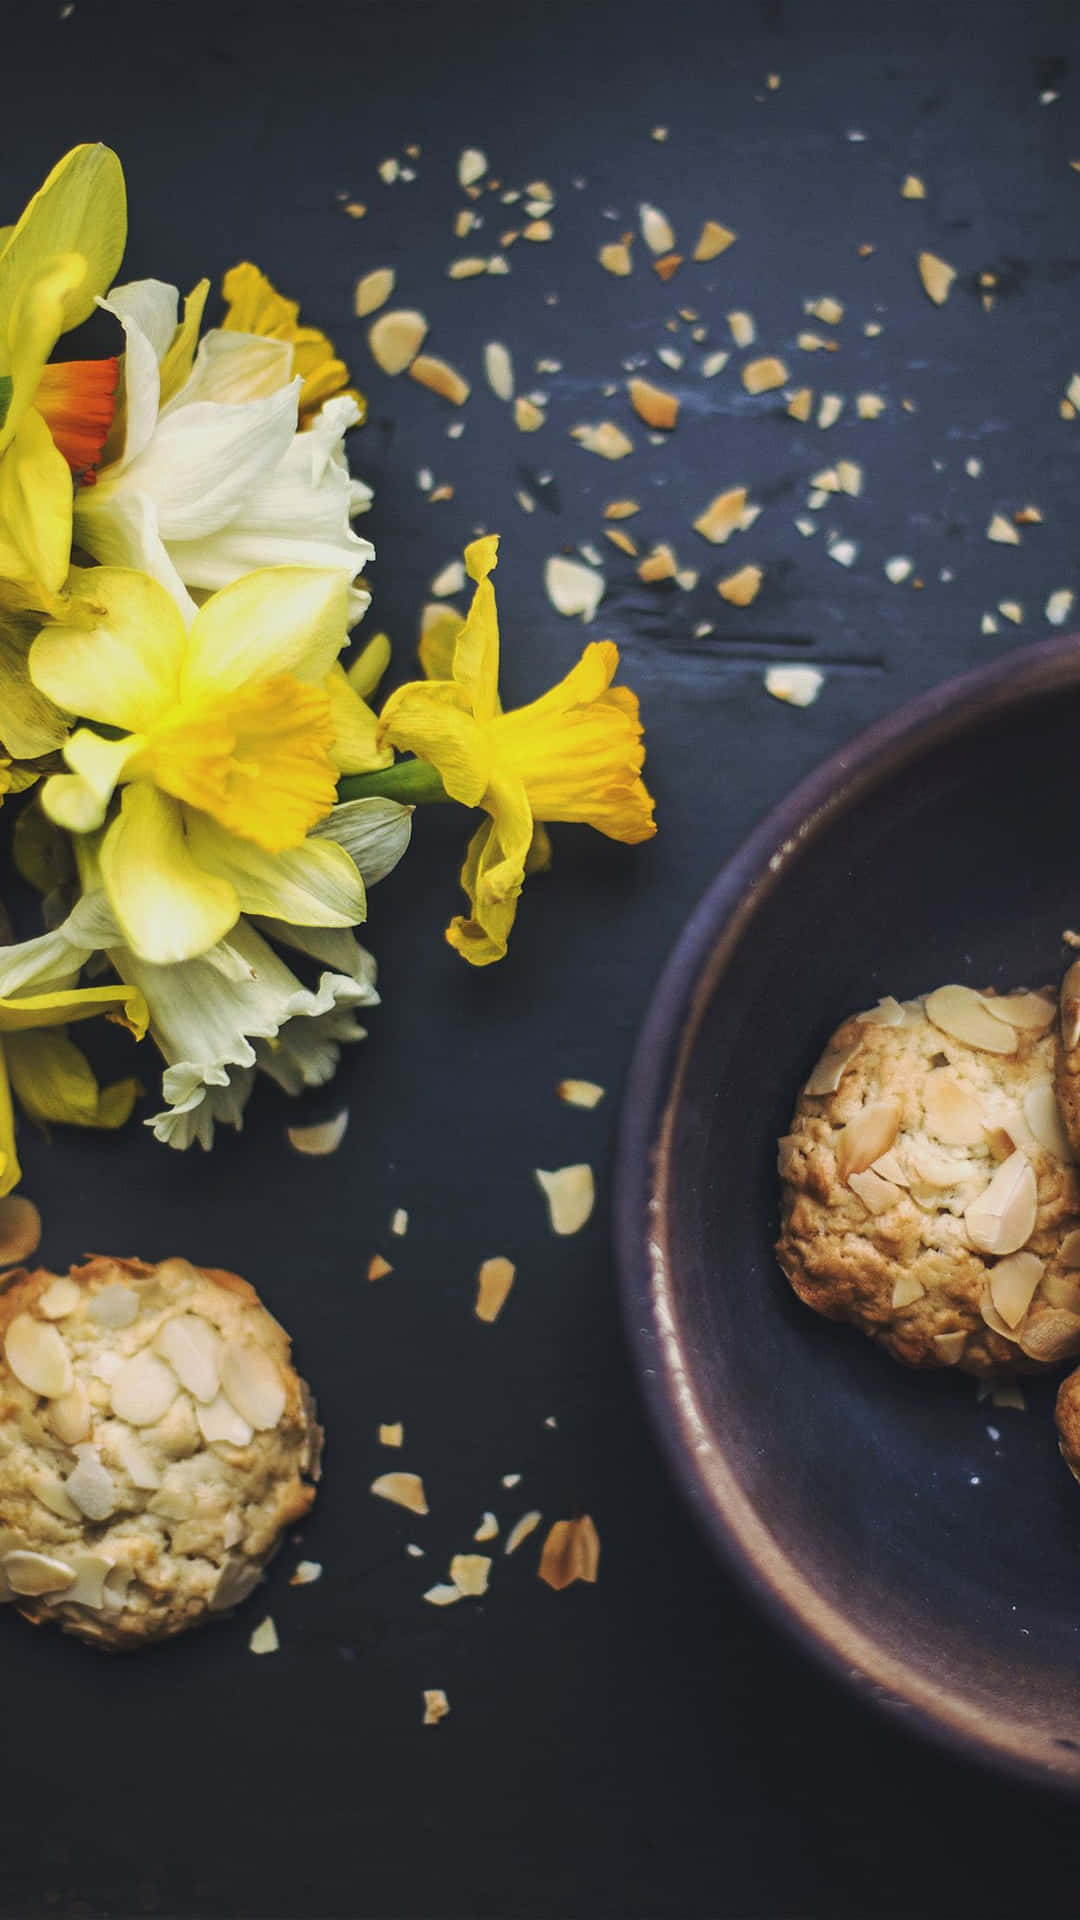 Almond Cookies With Daffodils On A Plate Wallpaper